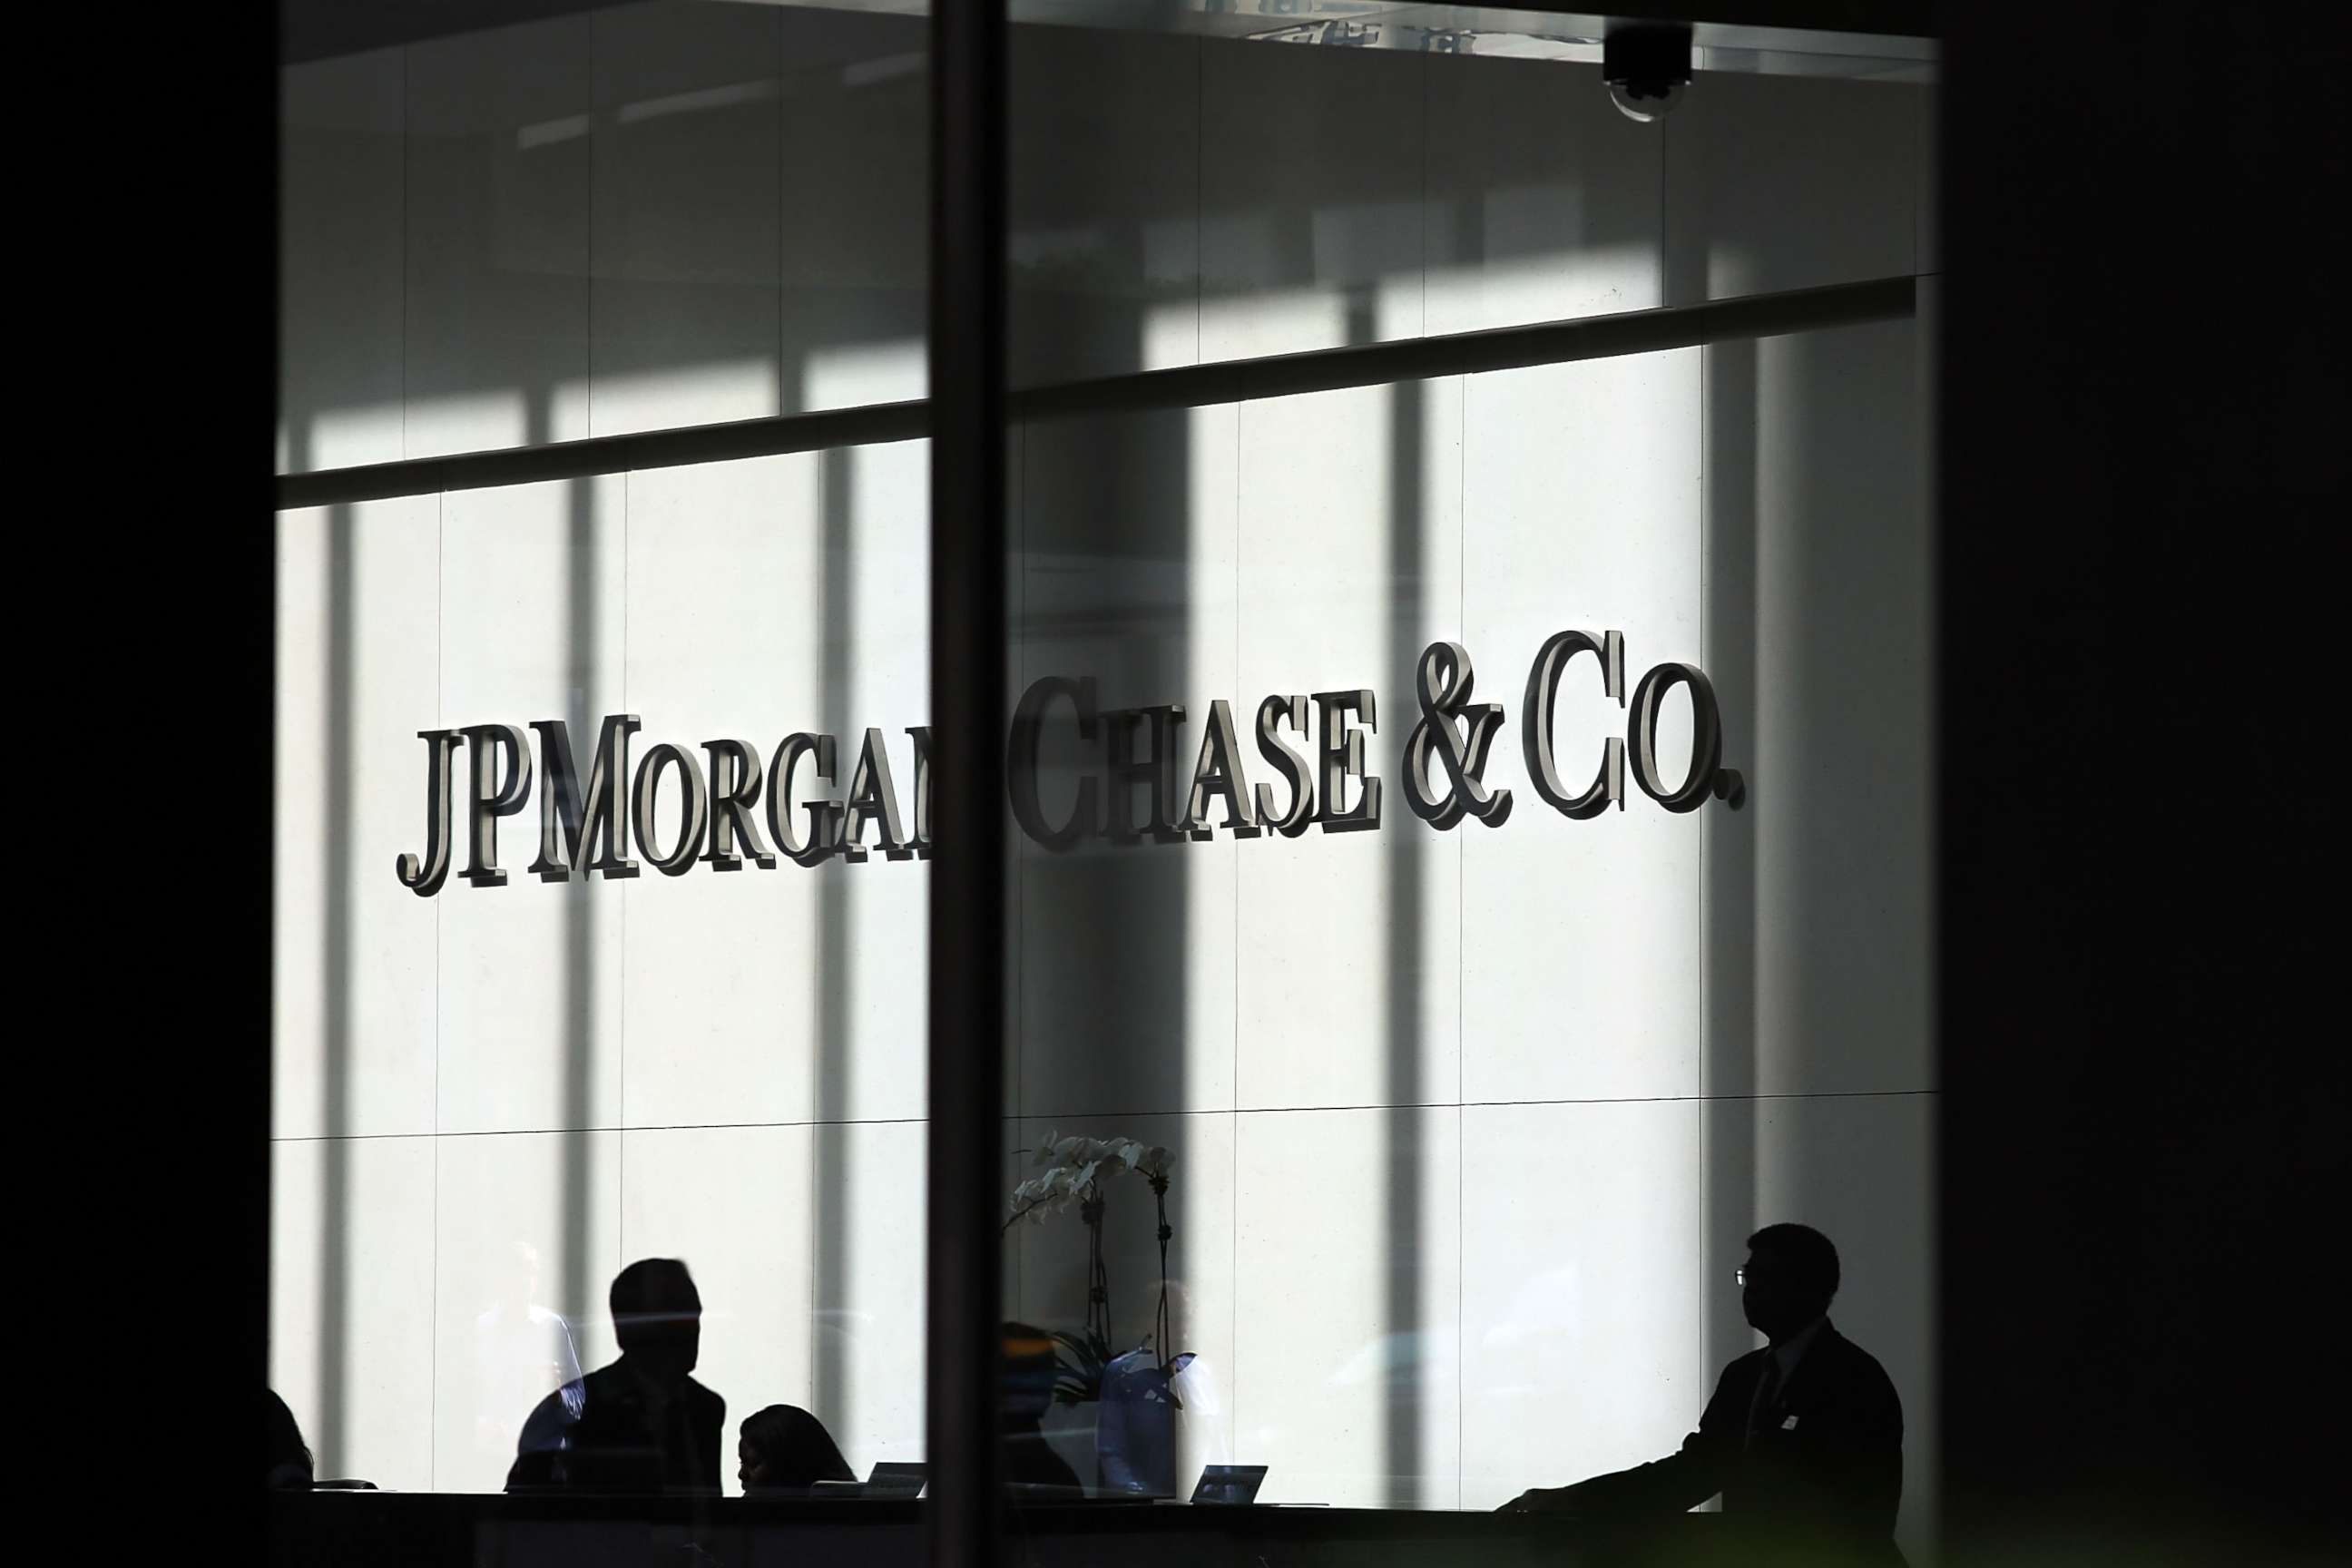 PHOTO: People pass a sign for JPMorgan Chase & Co. at it's headquarters in Manhattan, Oct. 2, 2012 in New York City.